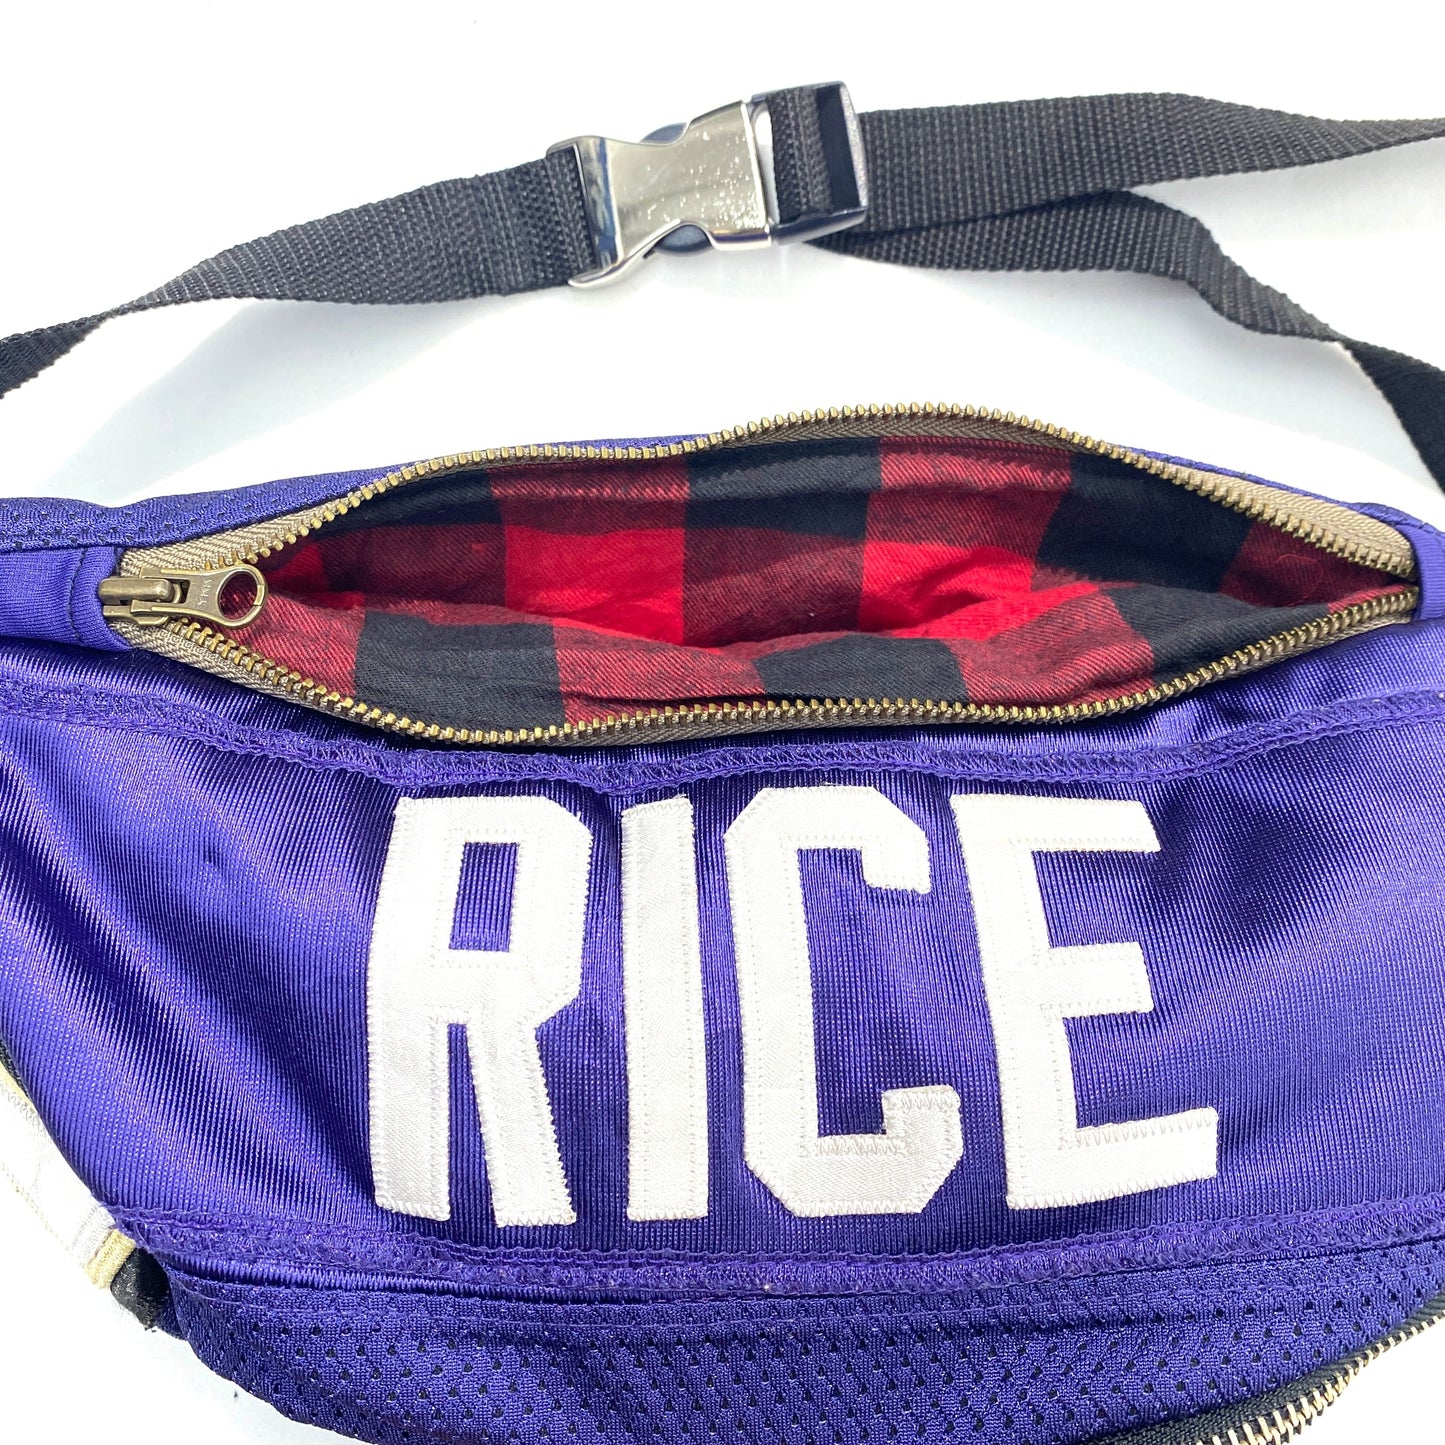 NFL Team Ravens "RICE" Amekaji Japanese Vintage Handmade Custom One and Only One Cote Mer Upcycle Sustainable Upscale Street Fashion Embroidered Remake Deconstructed Shirts Waist Bag